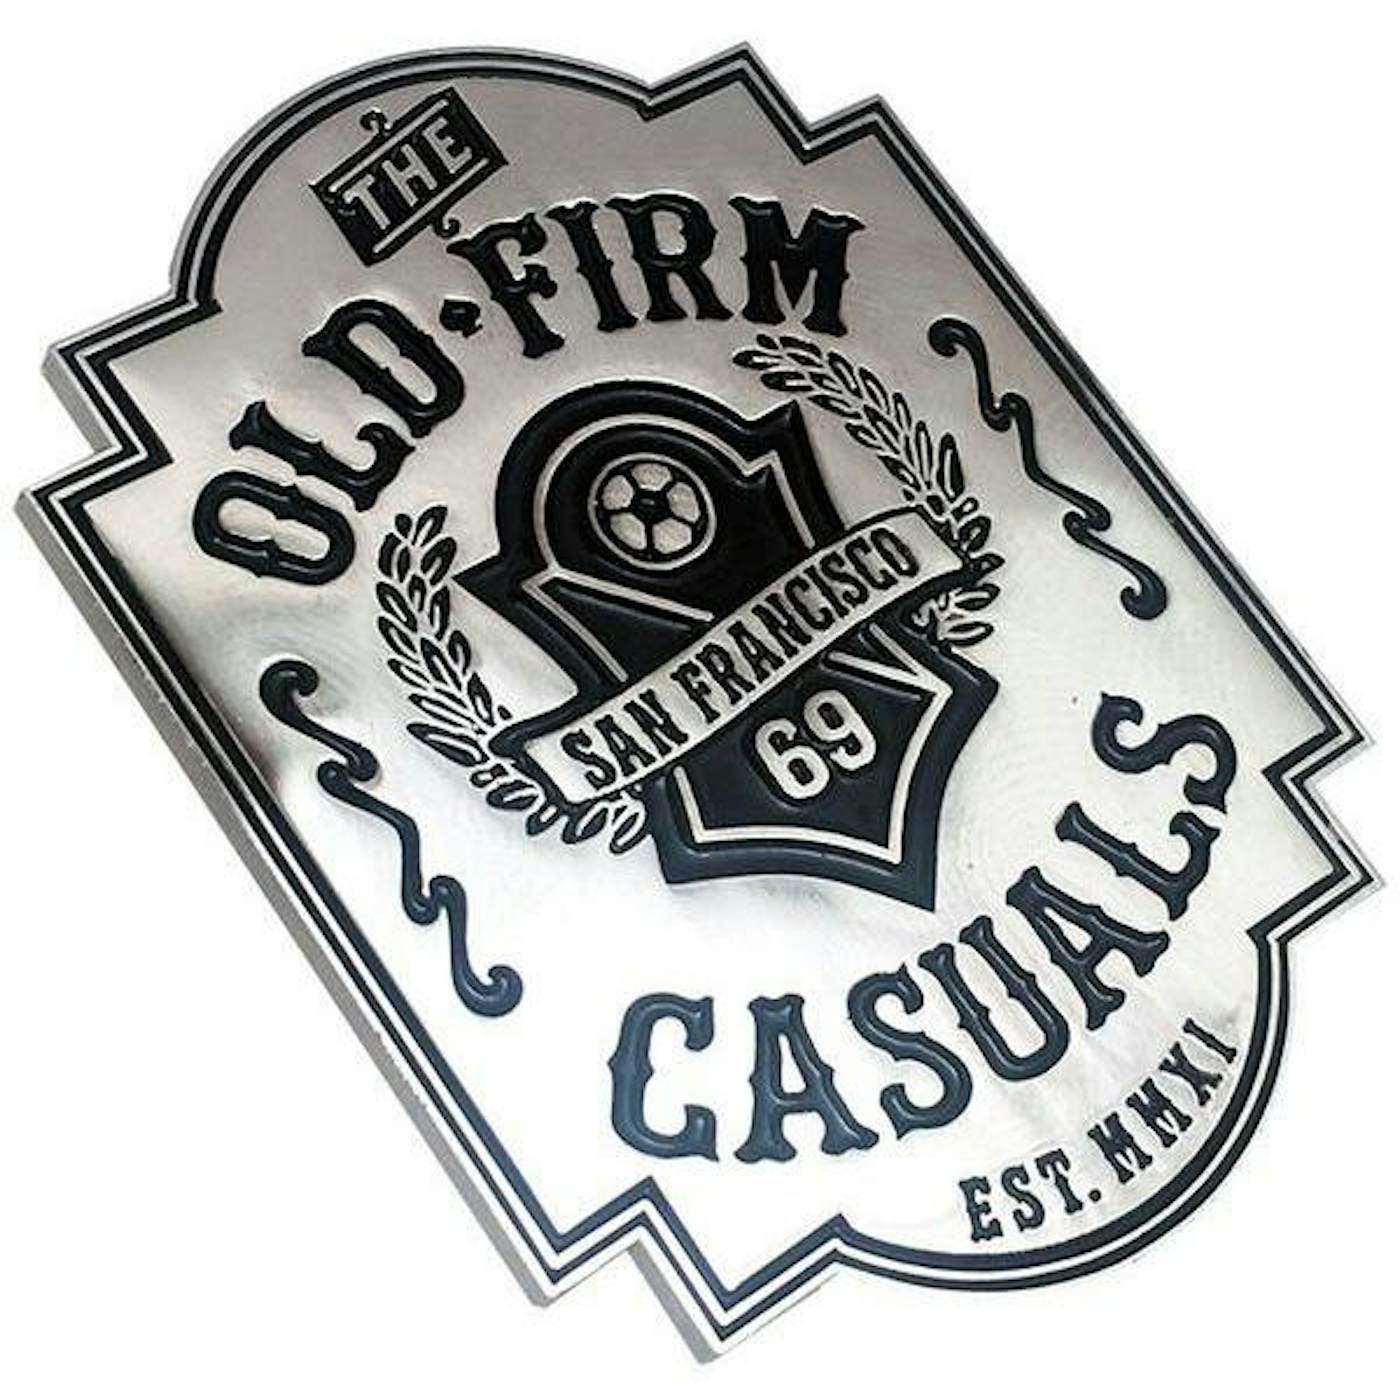 The Old Firm Casuals - Soccer Crest - 2" Enamel Pin